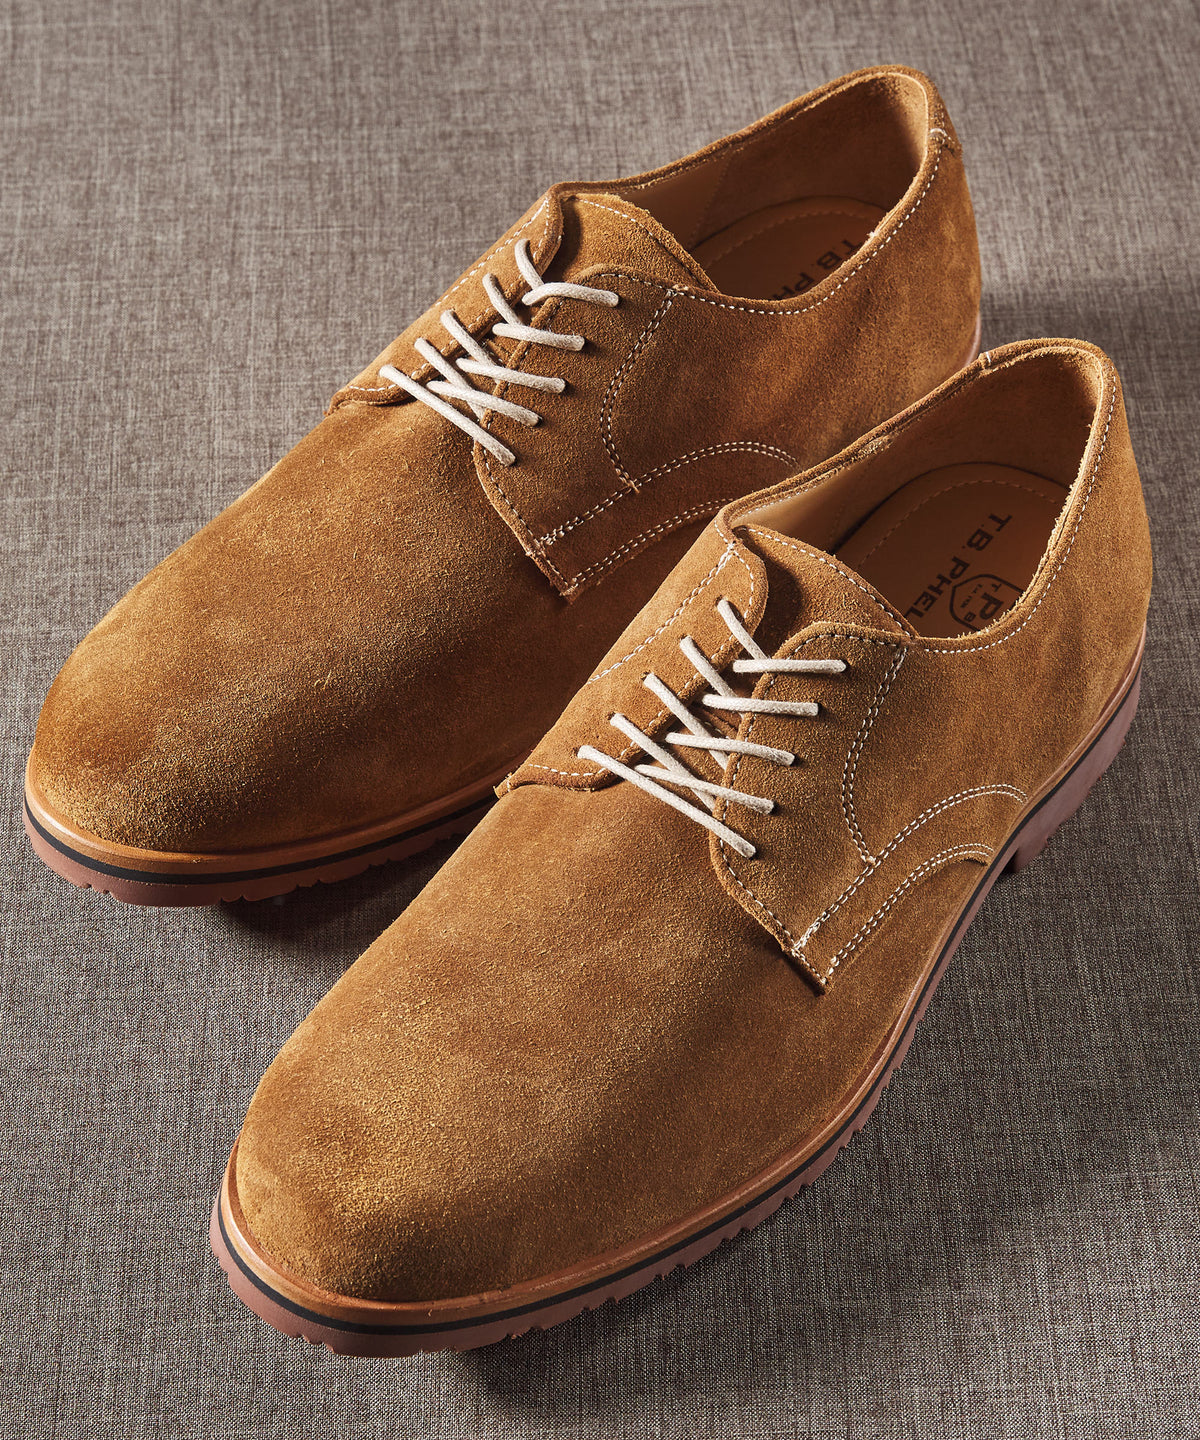 T.B. Phelps Spencer Dirty Buck Suede Sport Oxford